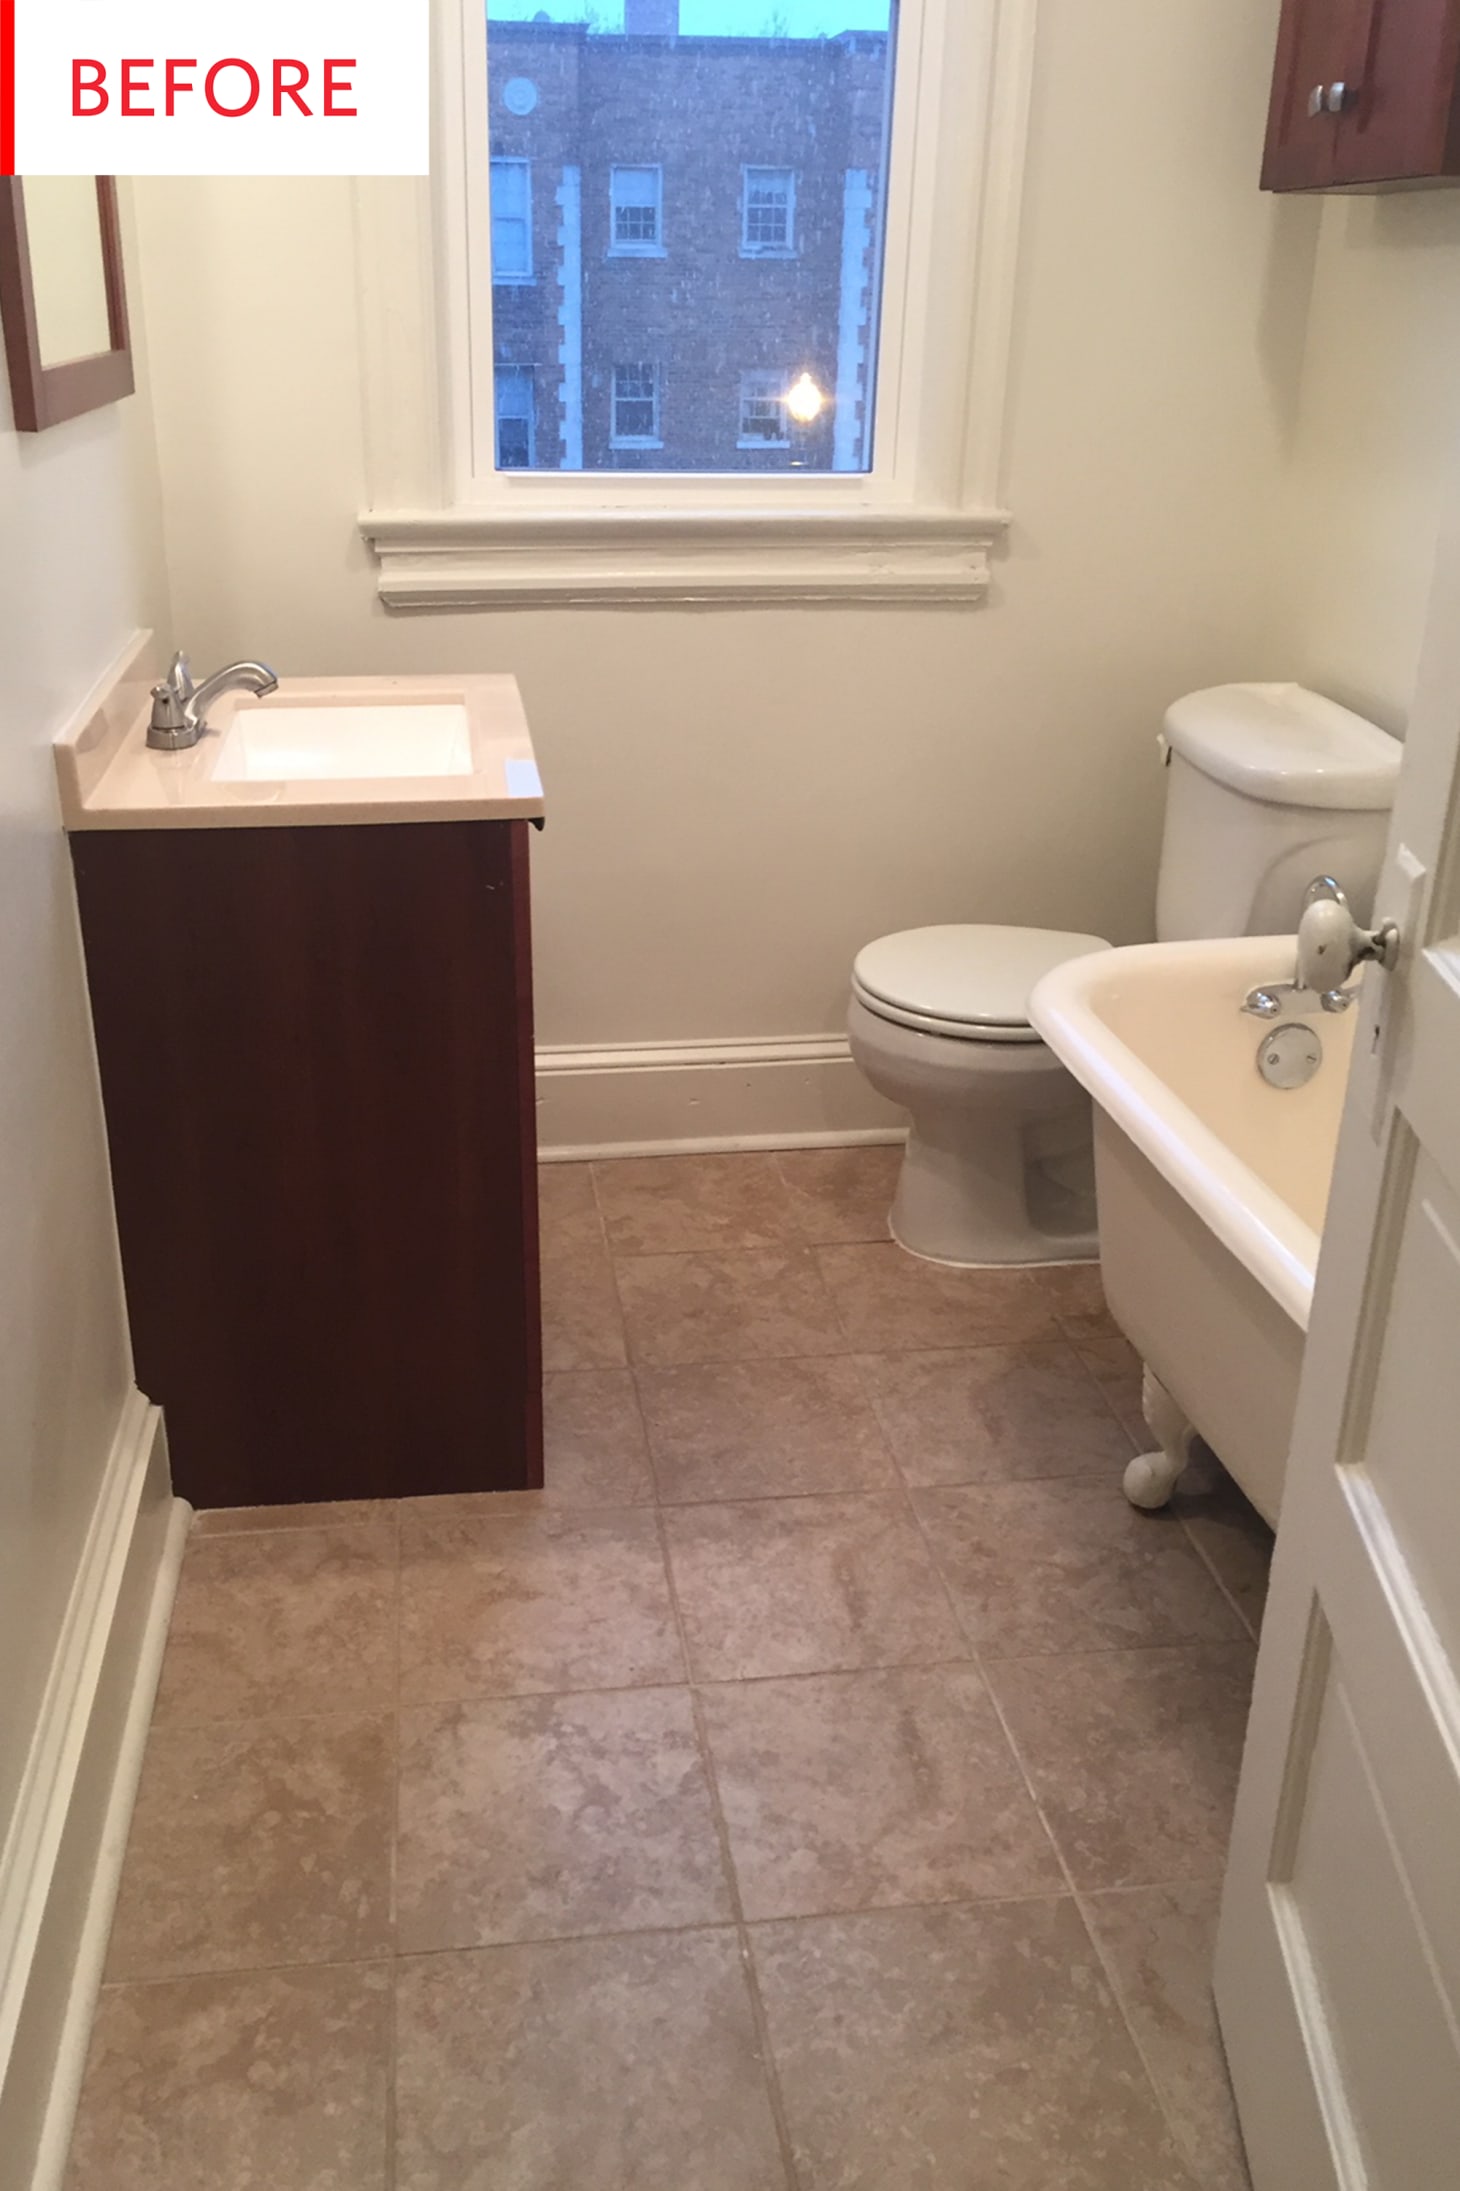 Clawfoot Tub Bathroom Remodel Photos Apartment Therapy